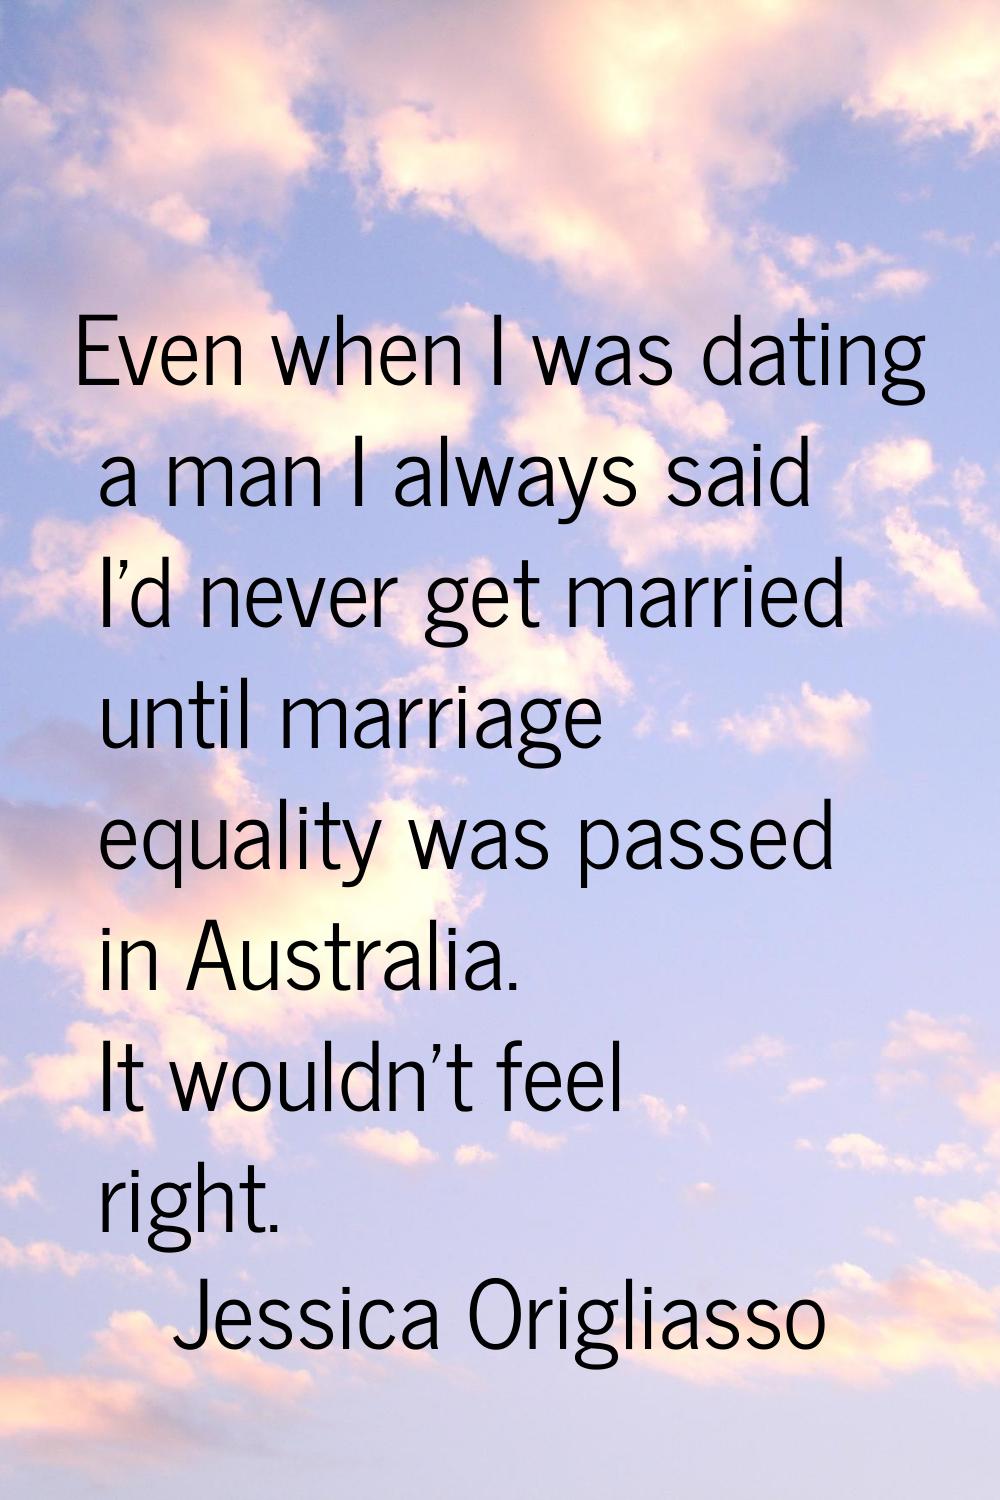 Even when I was dating a man I always said I'd never get married until marriage equality was passed